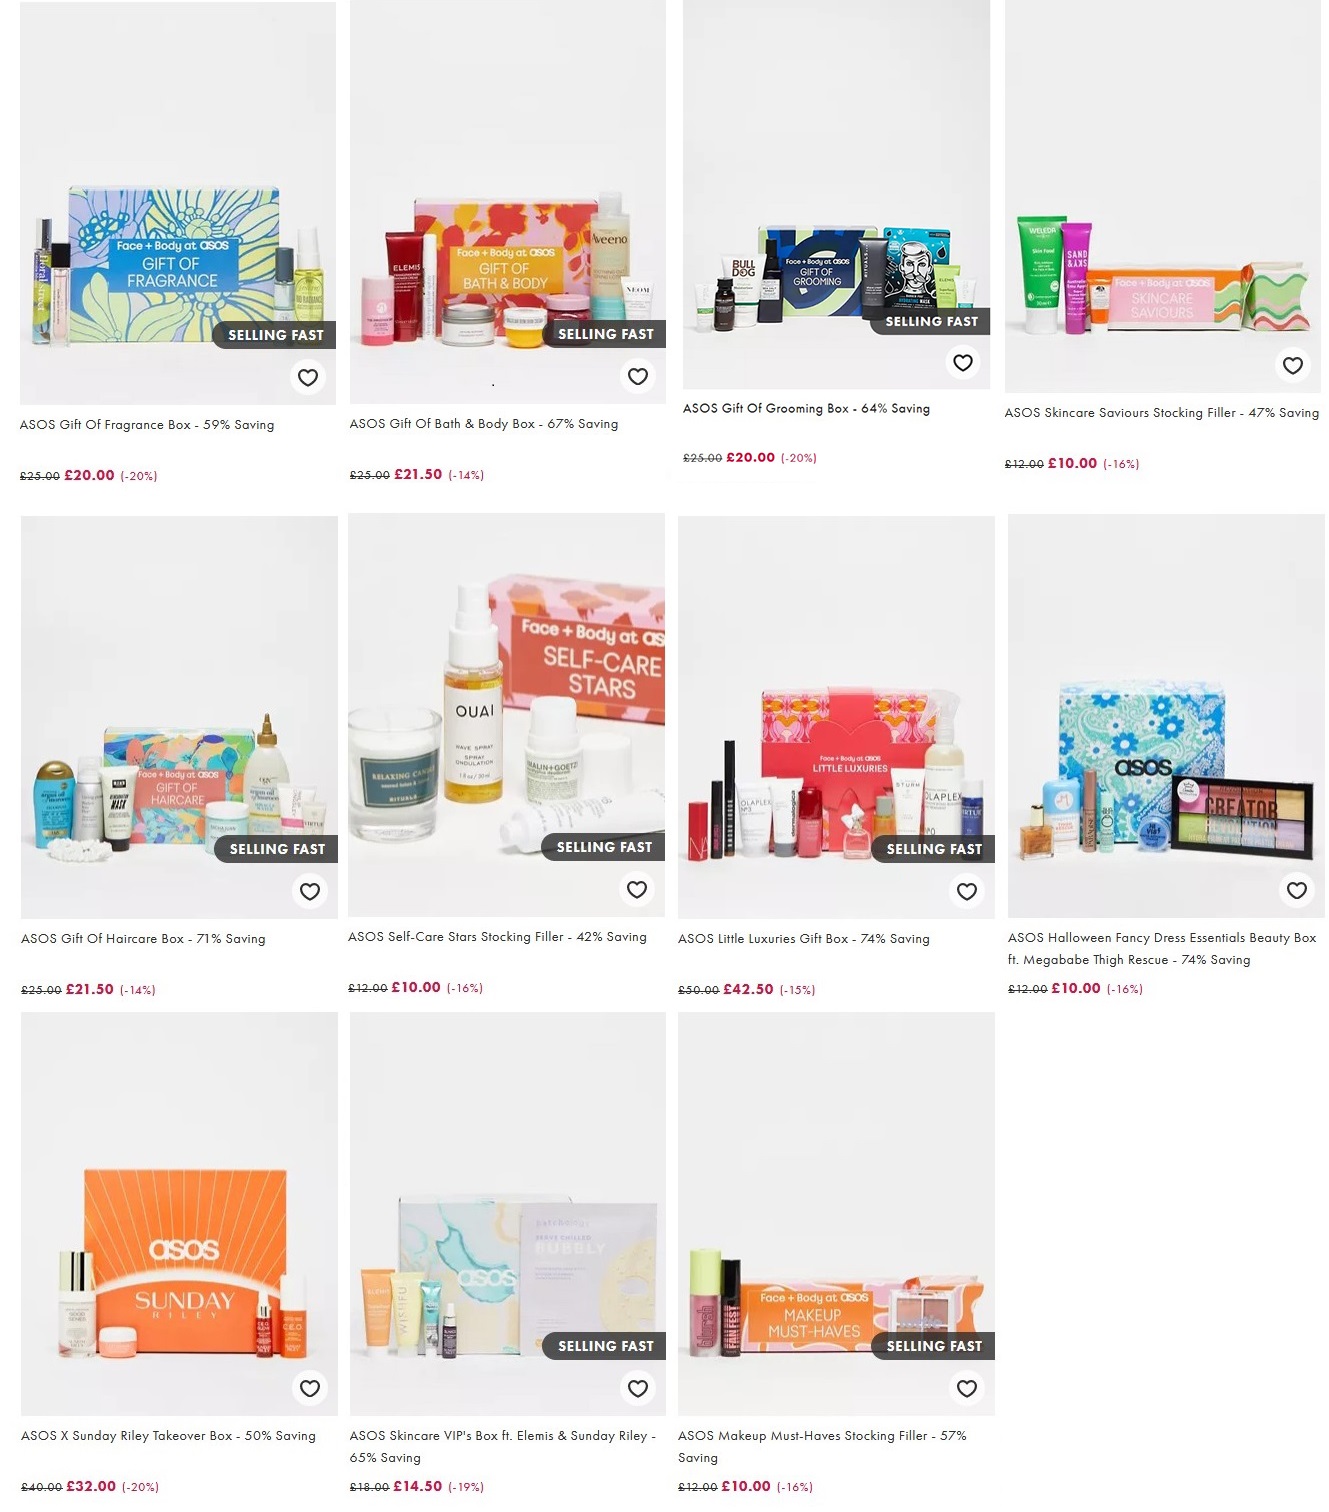 Up to 20% off ASOS Beauty Boxes.